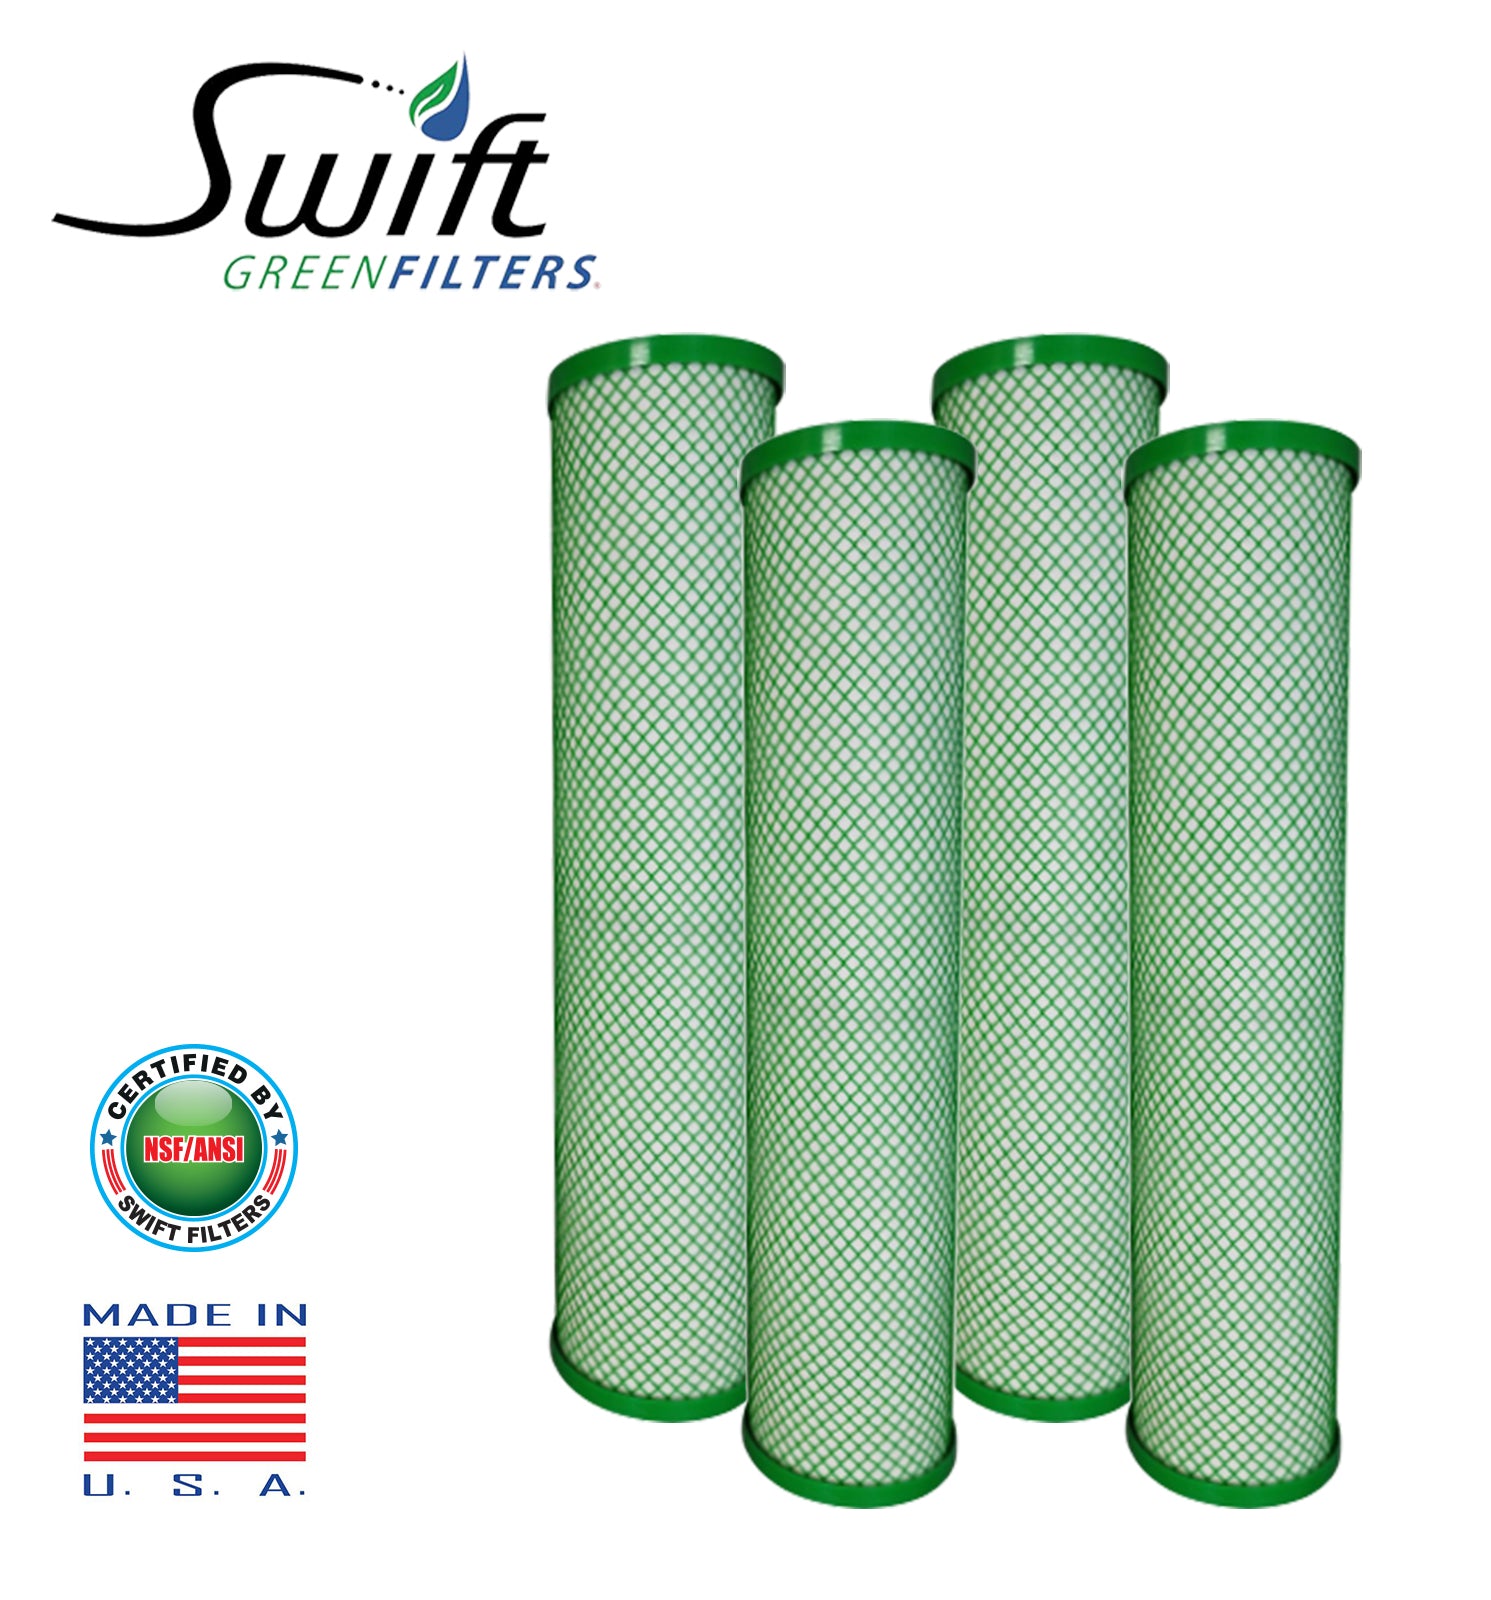 Swift (SGFB10CL2) 9.75"x 4.5" CL2 Green Block Carbon Filter 10 Micron By Swift Green Filters